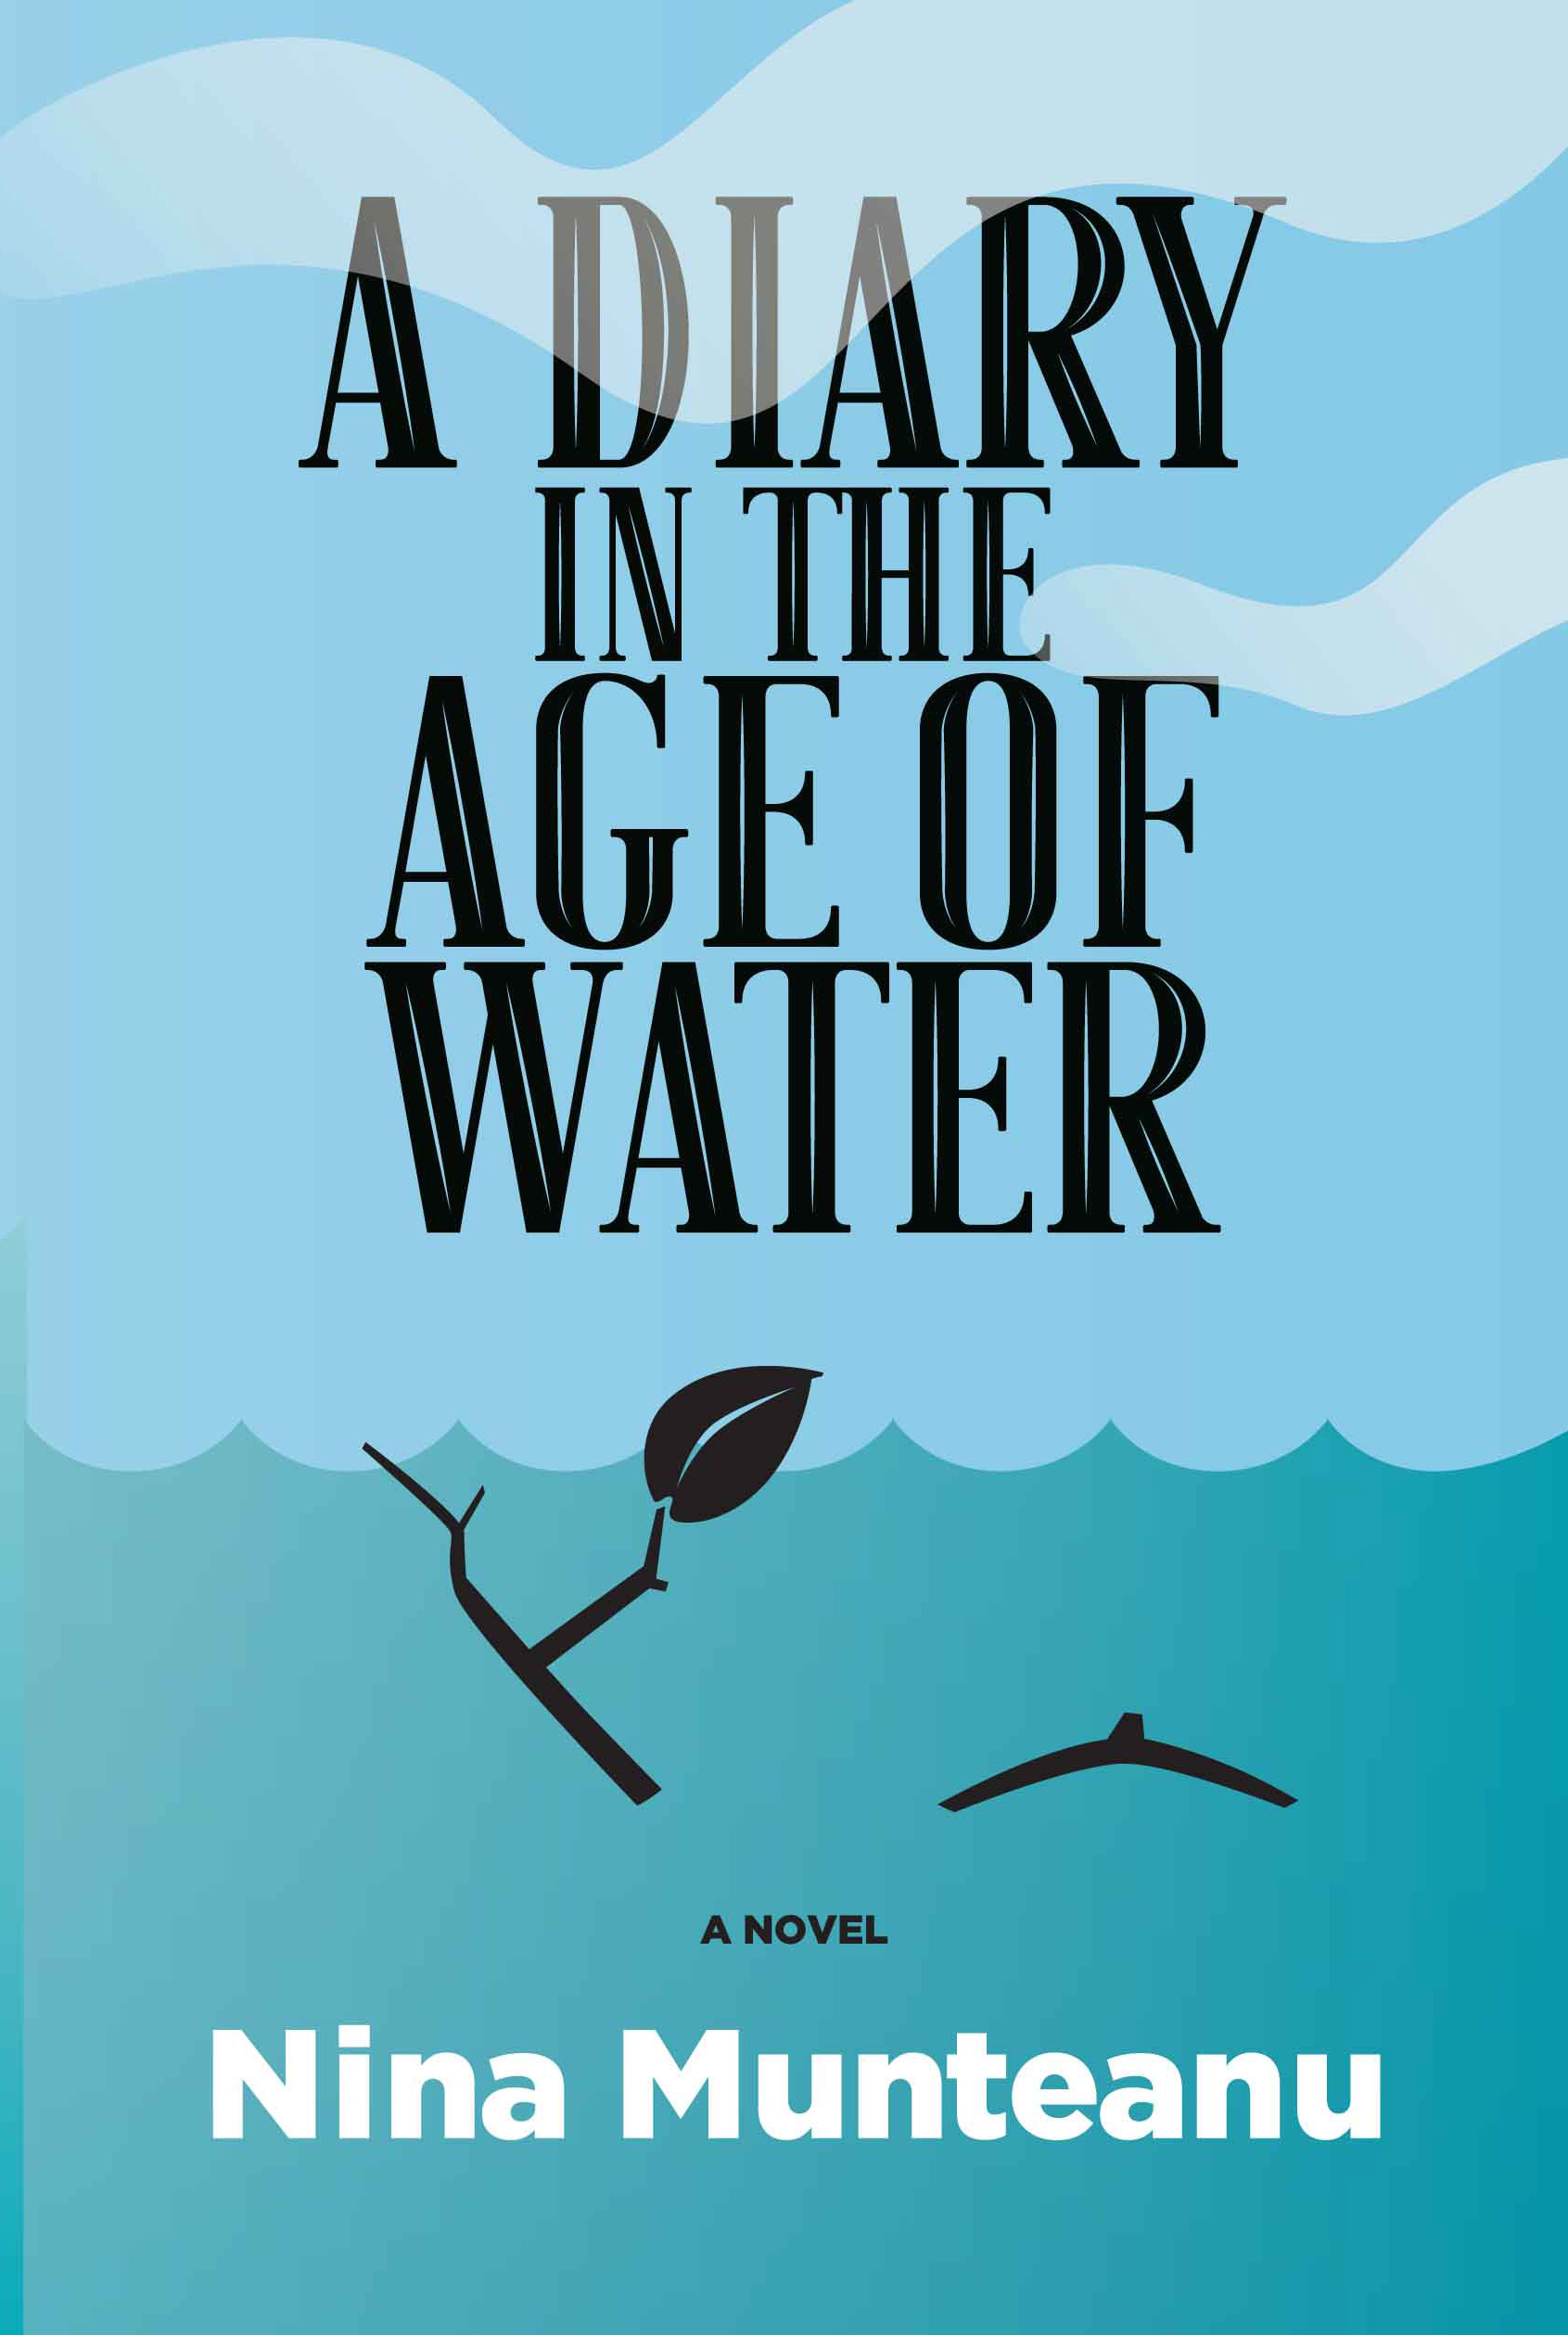 A Diary in the Age of Water